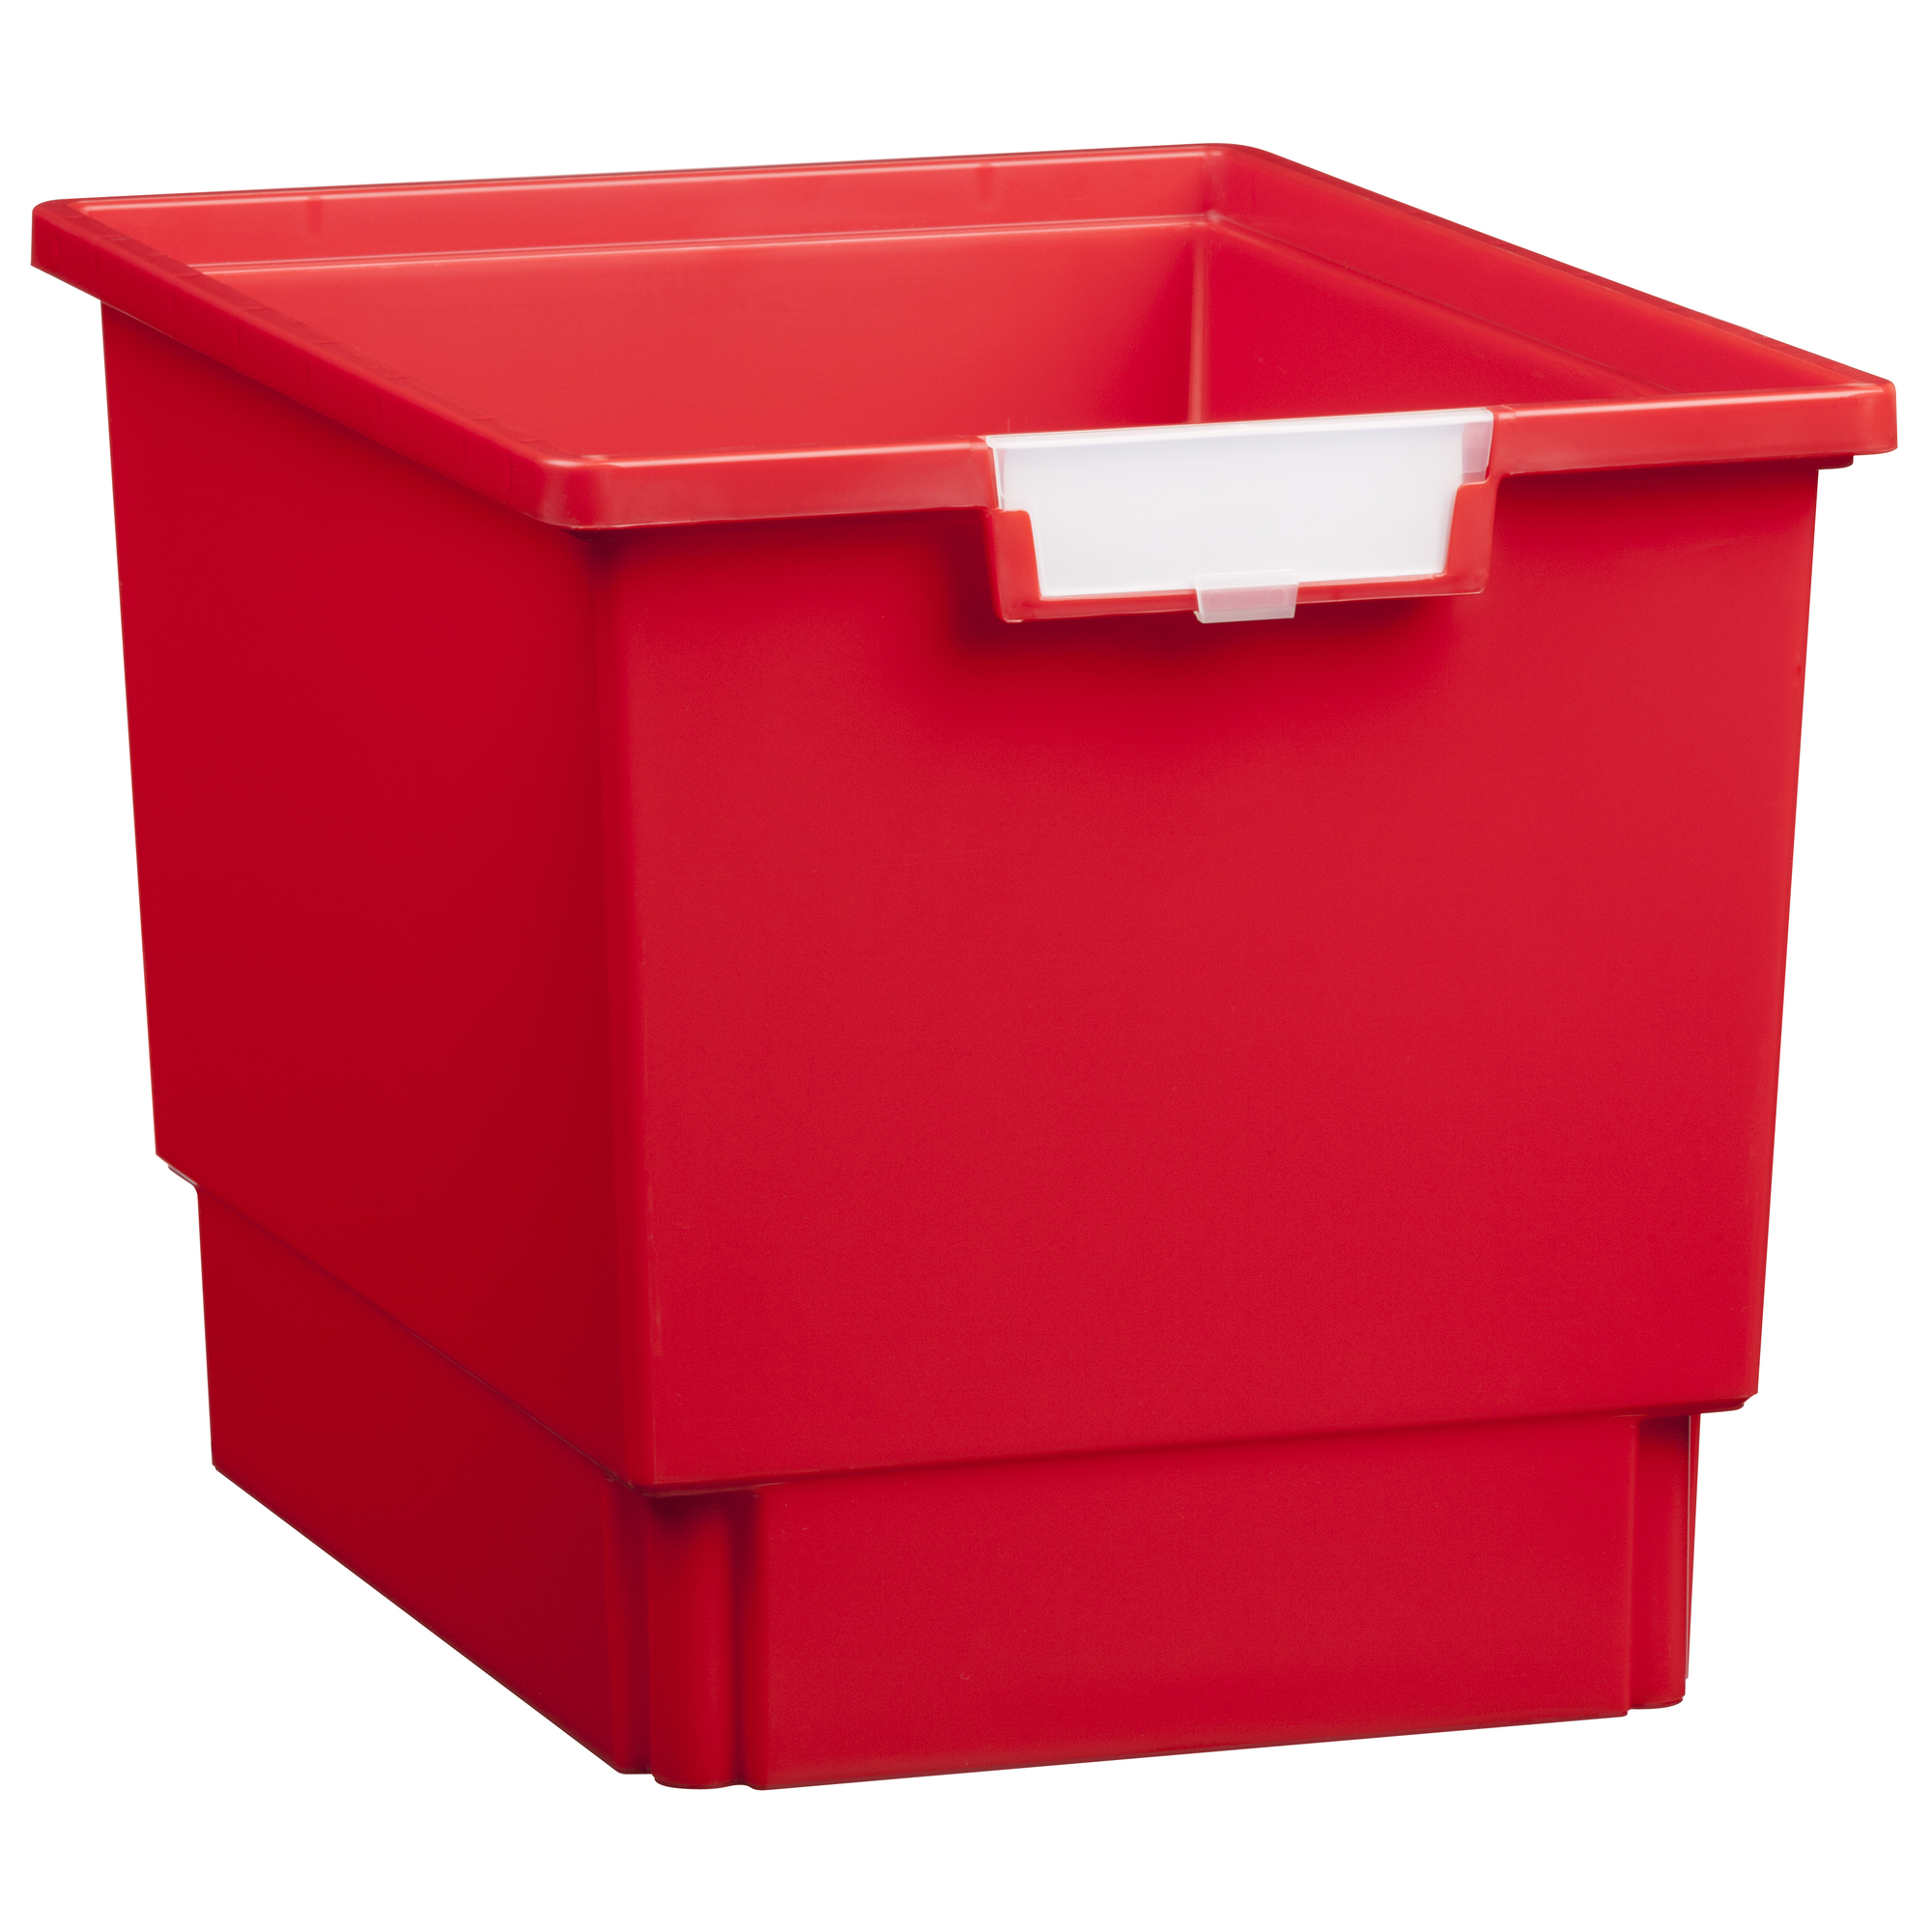 Certwood StorWerks, Slim Line 12Inch Tray in Primary Red-1PK, Included (qty.) 1 Height 12 in, Model CE1954PR1